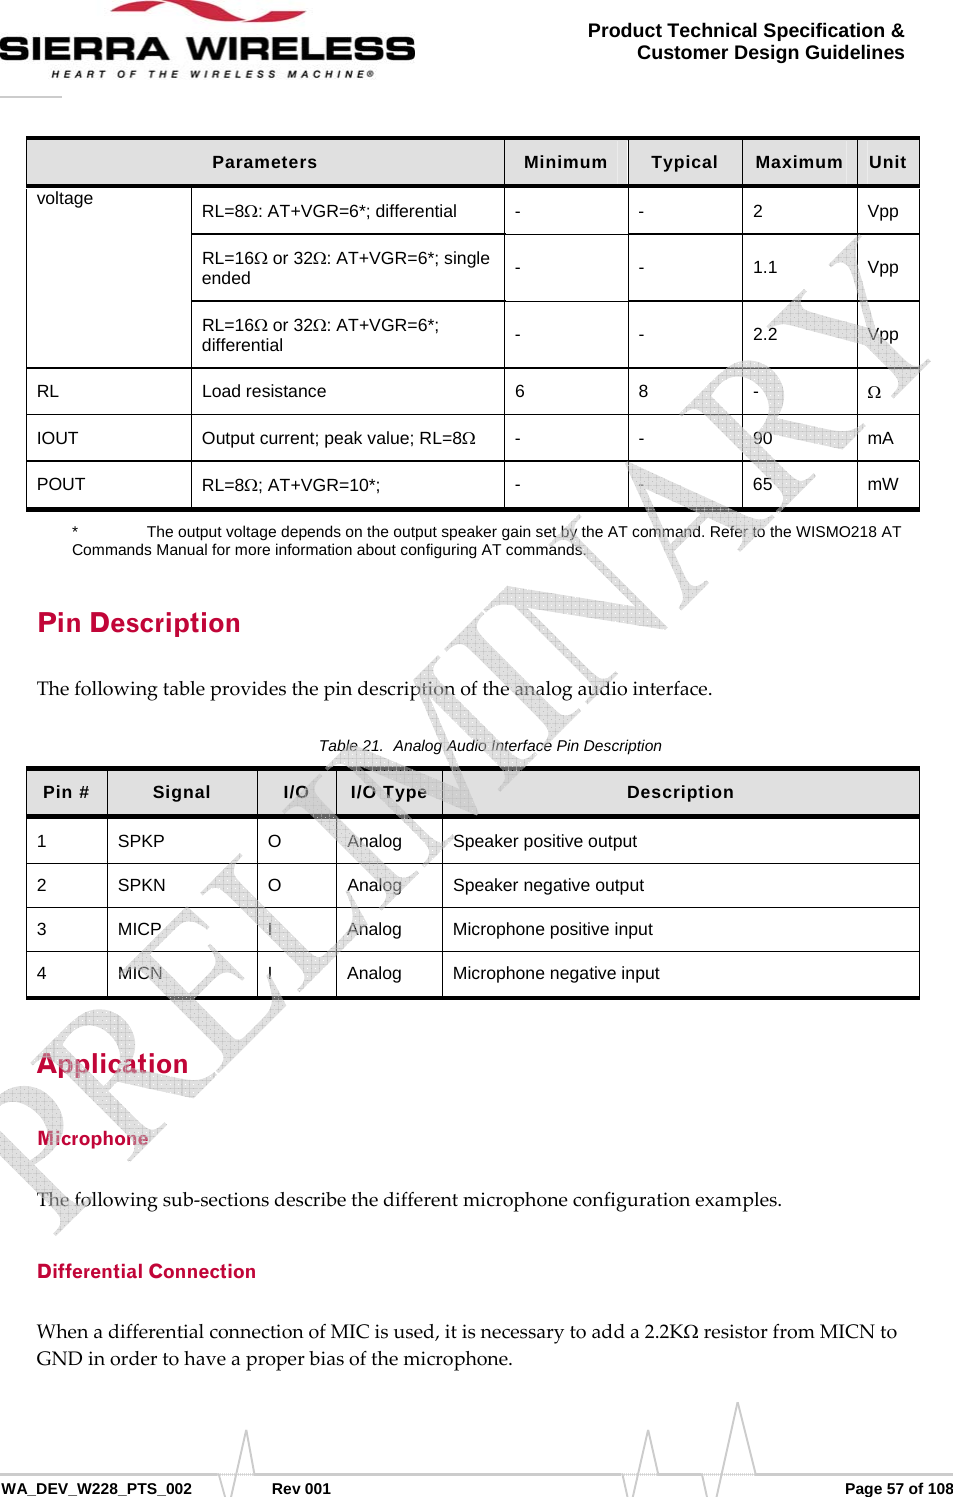      WA_DEV_W228_PTS_002 Rev 001  Page 57 of 108 Product Technical Specification &amp; Customer Design Guidelines Parameters  Minimum  Typical  Maximum  Unit voltage  RL=8Ω: AT+VGR=6*; differential  - - 2 Vpp RL=16Ω or 32Ω: AT+VGR=6*; single ended  - - 1.1 Vpp RL=16Ω or 32Ω: AT+VGR=6*; differential  - - 2.2 Vpp RL Load resistance  6 8 - Ω IOUT  Output current; peak value; RL=8Ω - - 90 mA POUT  RL=8Ω; AT+VGR=10*;  - - 65 mW *    The output voltage depends on the output speaker gain set by the AT command. Refer to the WISMO218 AT Commands Manual for more information about configuring AT commands. Pin Description Thefollowingtableprovidesthepindescriptionoftheanalogaudiointerface.Table 21.  Analog Audio Interface Pin Description Pin #   Signal  I/O  I/O Type  Description 1 SPKP  O Analog Speaker positive output 2 SPKN  O Analog Speaker negative output 3 MICP  I  Analog Microphone positive input 4 MICN  I  Analog Microphone negative input Application Microphone Thefollowingsub‐sectionsdescribethedifferentmicrophoneconfigurationexamples.Differential Connection WhenadifferentialconnectionofMICisused,itisnecessarytoadda2.2KΩresistorfromMICNtoGNDinordertohaveaproperbiasofthemicrophone.   